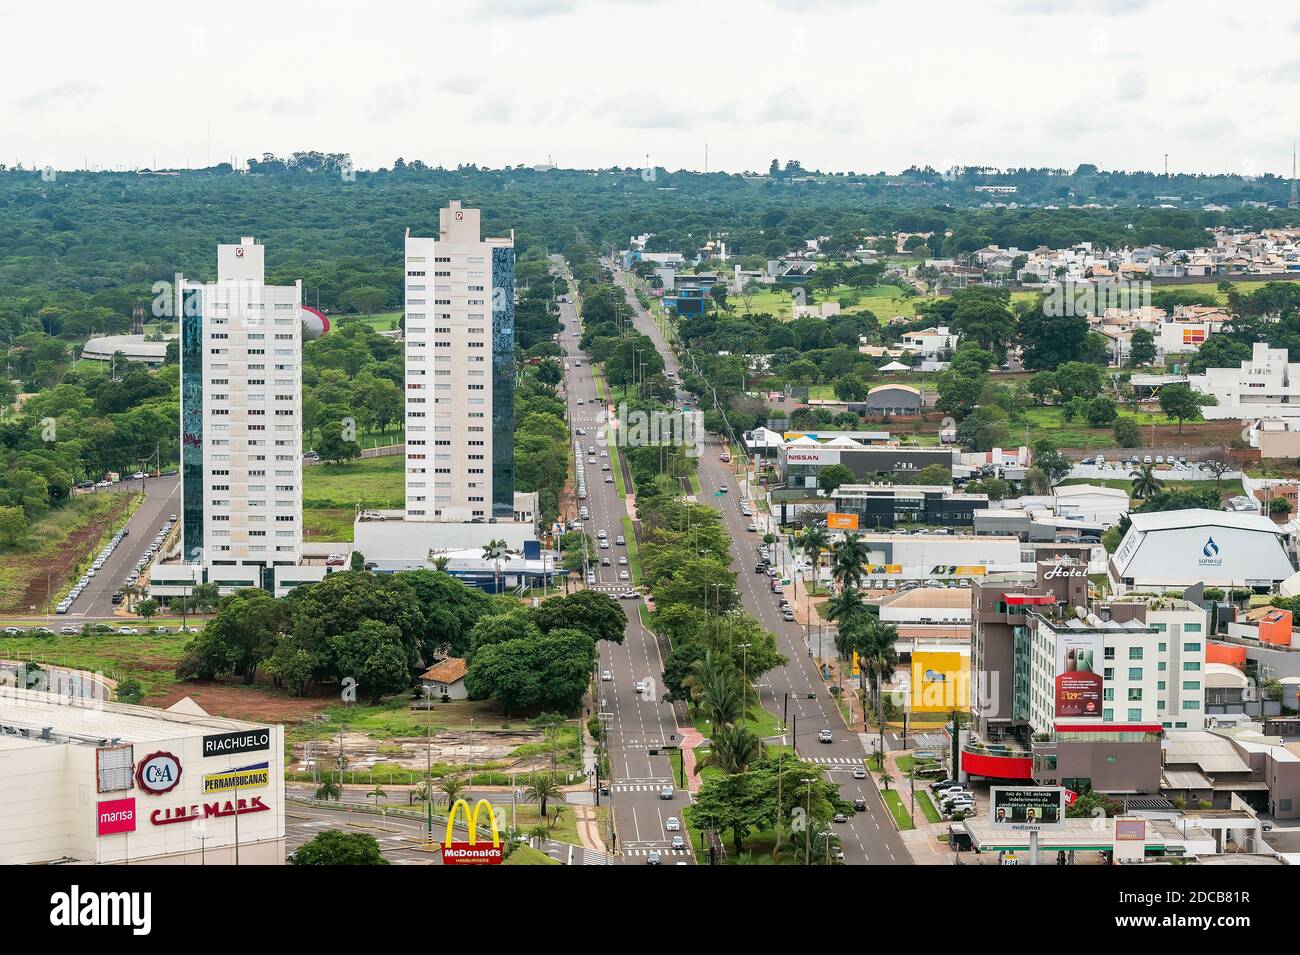 Campo Grande - MS, Brazil - november 12, 2020: Aerial view of the highs of the Afonso Pena avenue and the Parque dos Poderes park on the background. Stock Photo